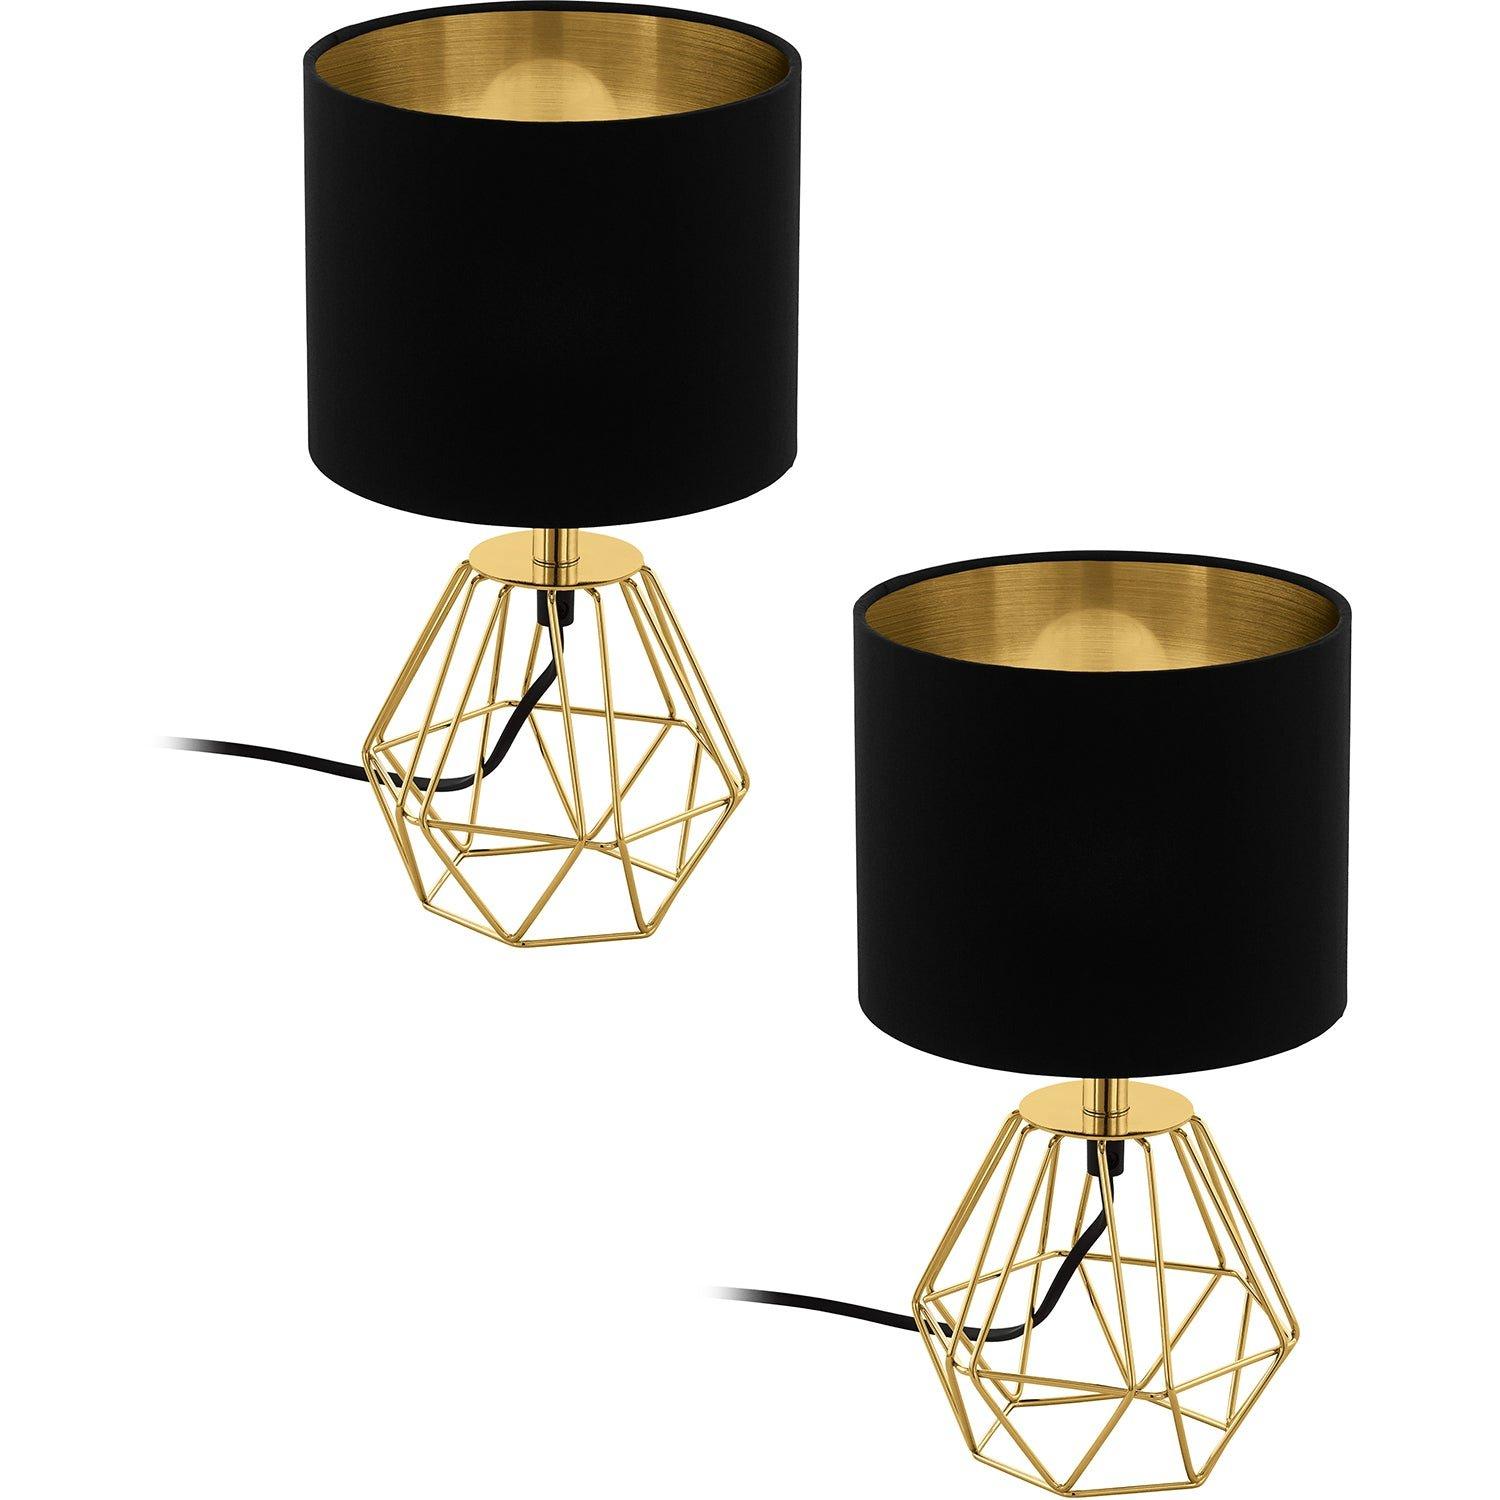 2 PACK Table Lamp Colour Brass Steel Base Shade Black Gold Fabric E14 1x60W